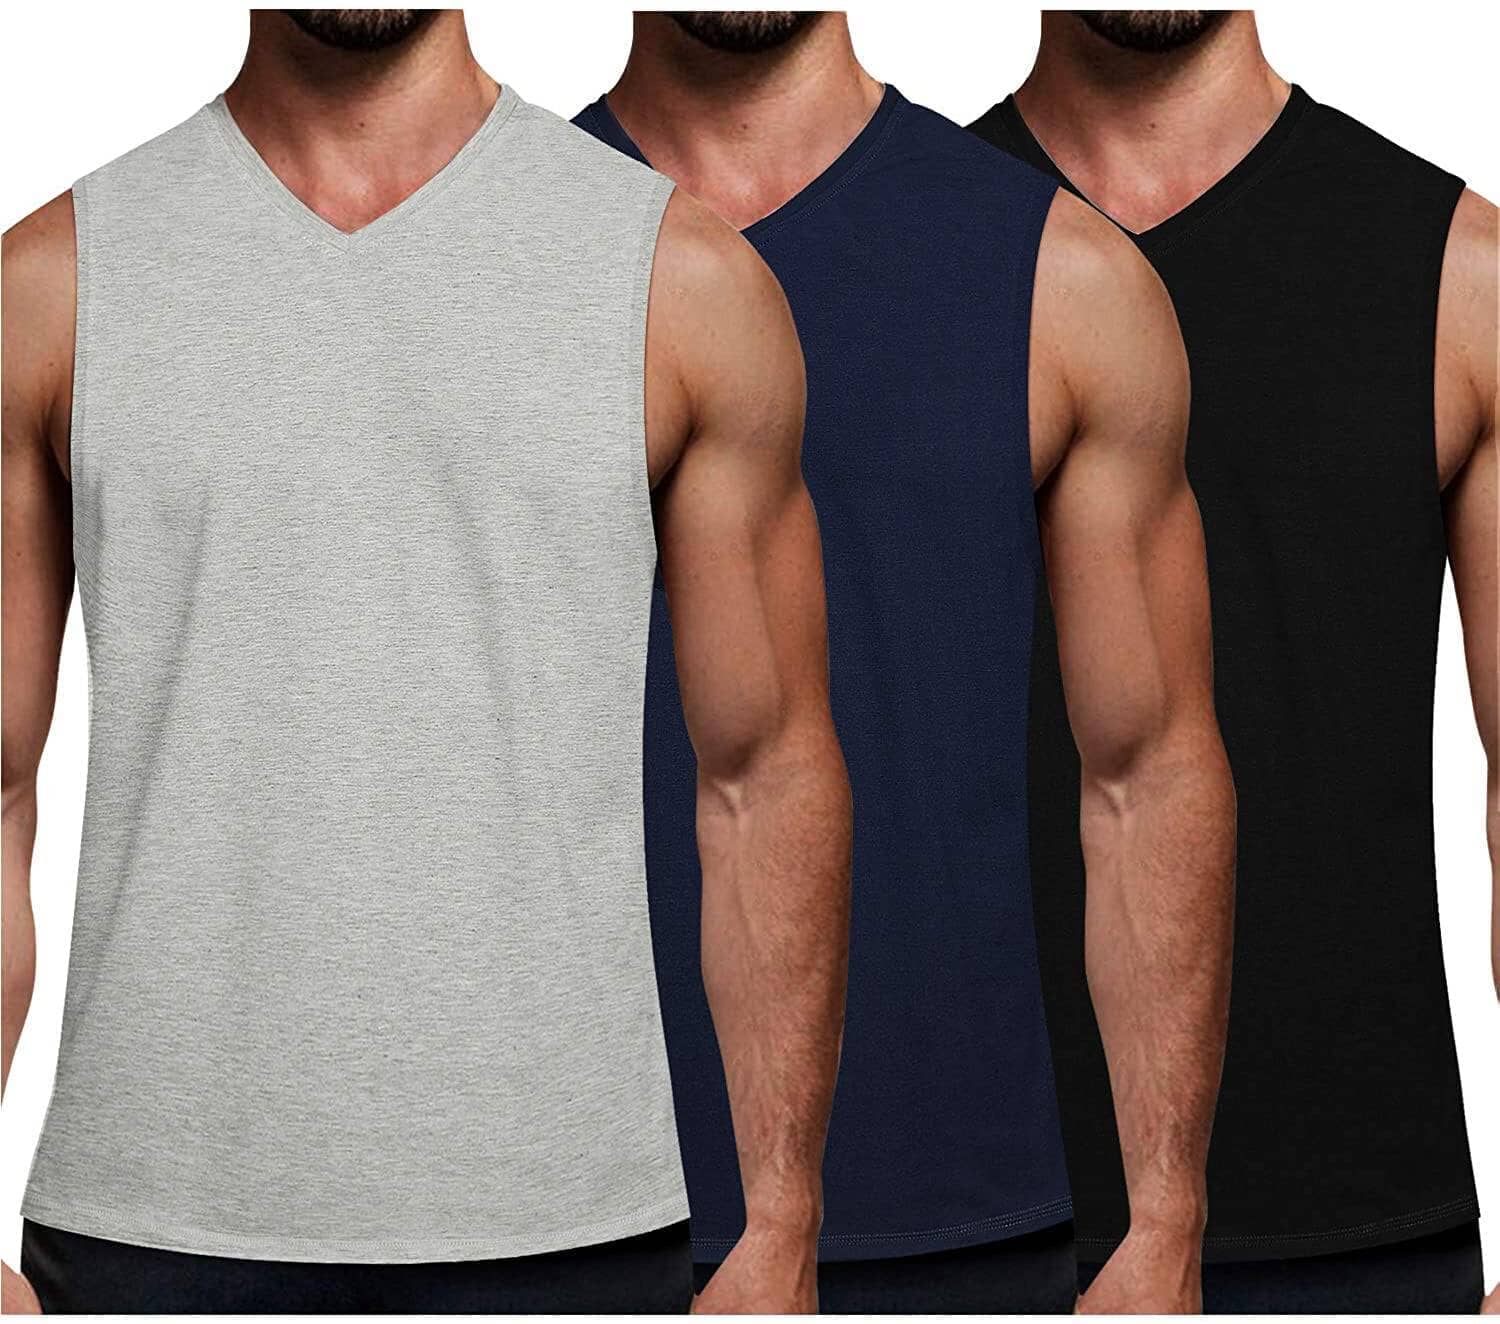 Coofandy 3-Pack Fitness Tank Top (US Only) Tank Tops coofandy light Grey/Navy Blue/Black S 